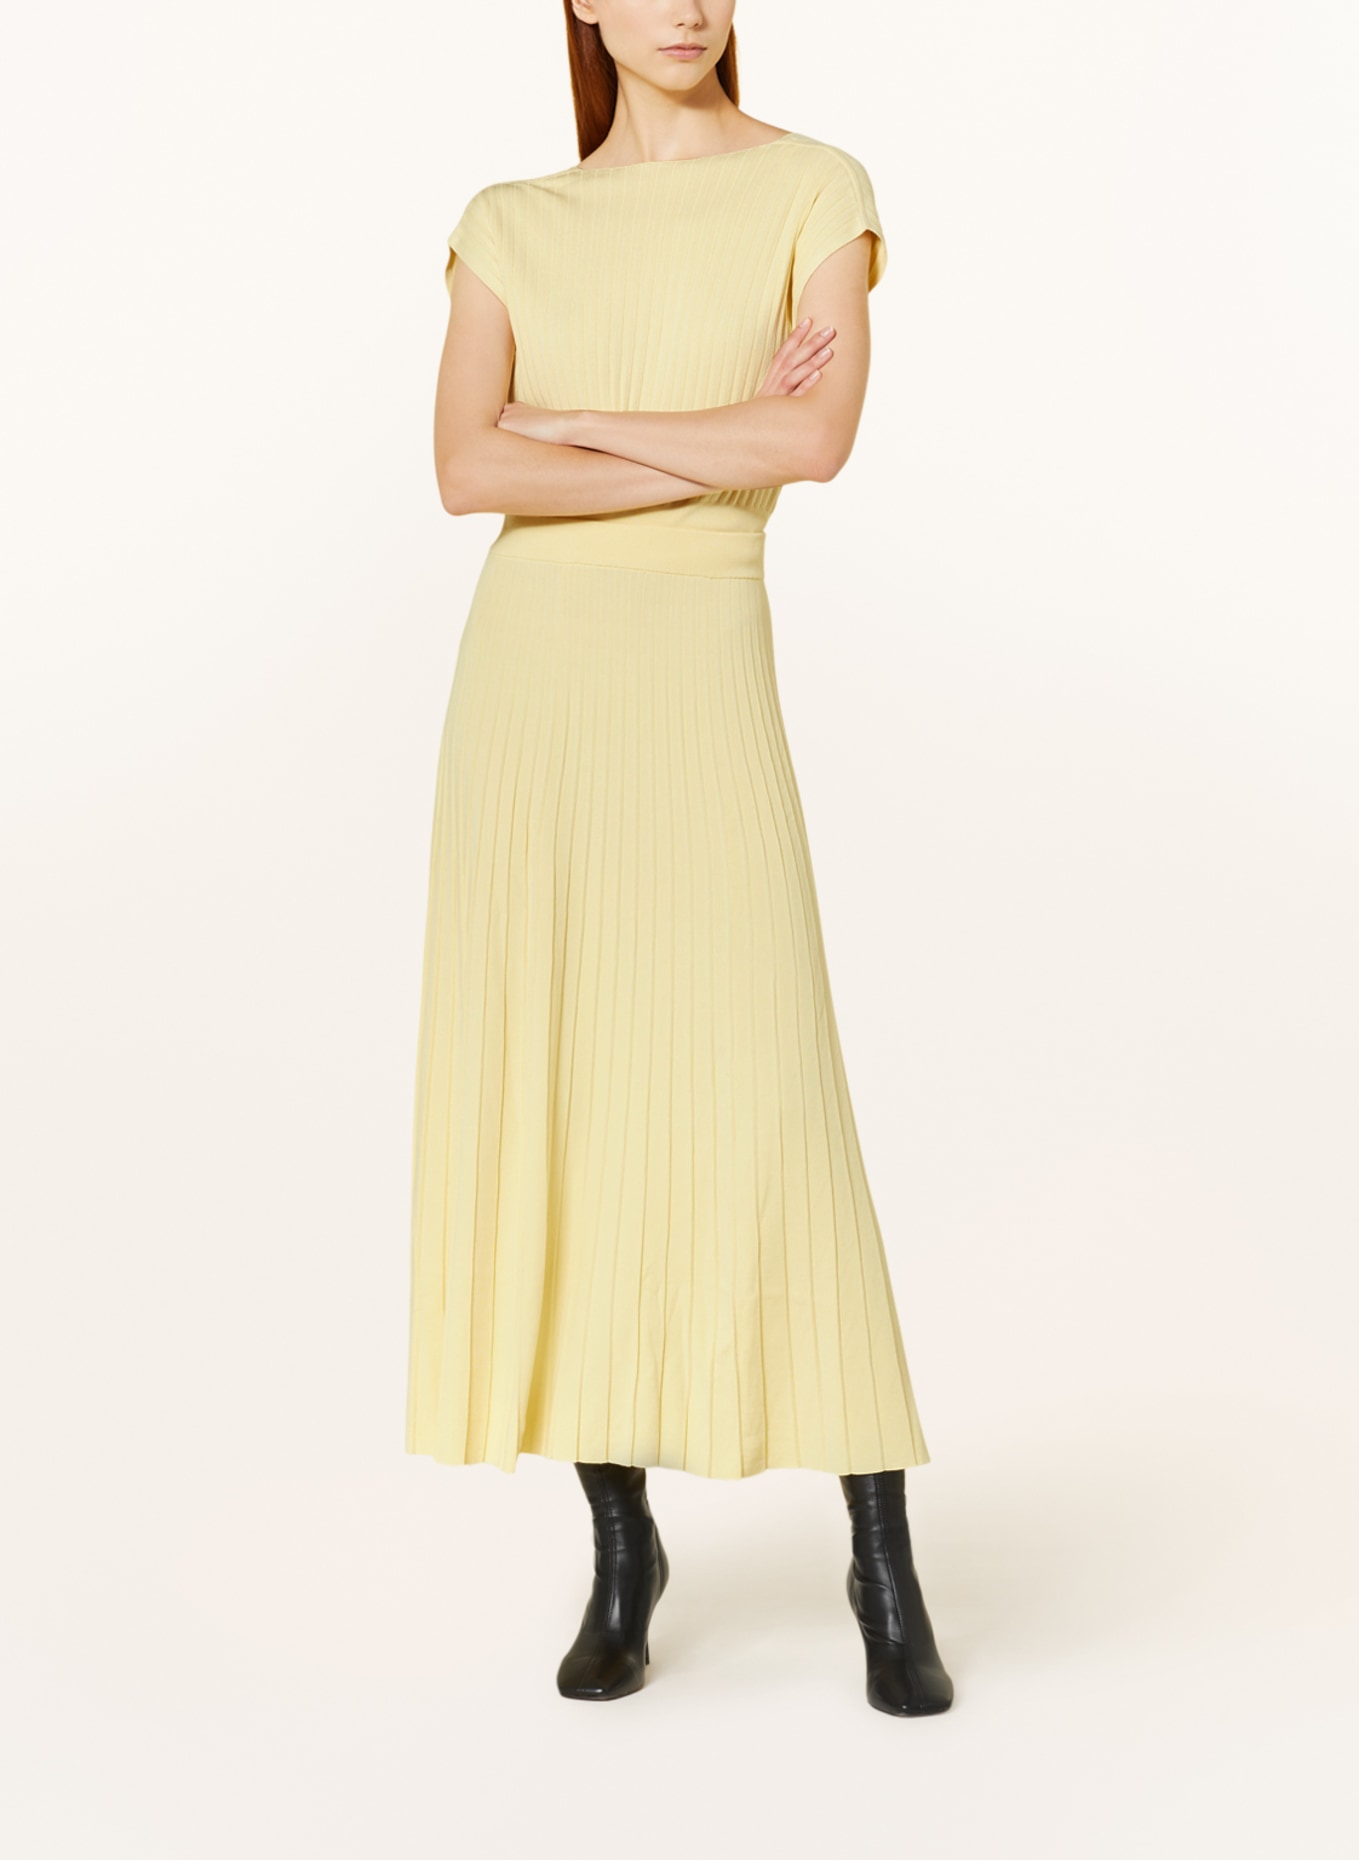 COS Knit skirt, Color: LIGHT YELLOW (Image 2)